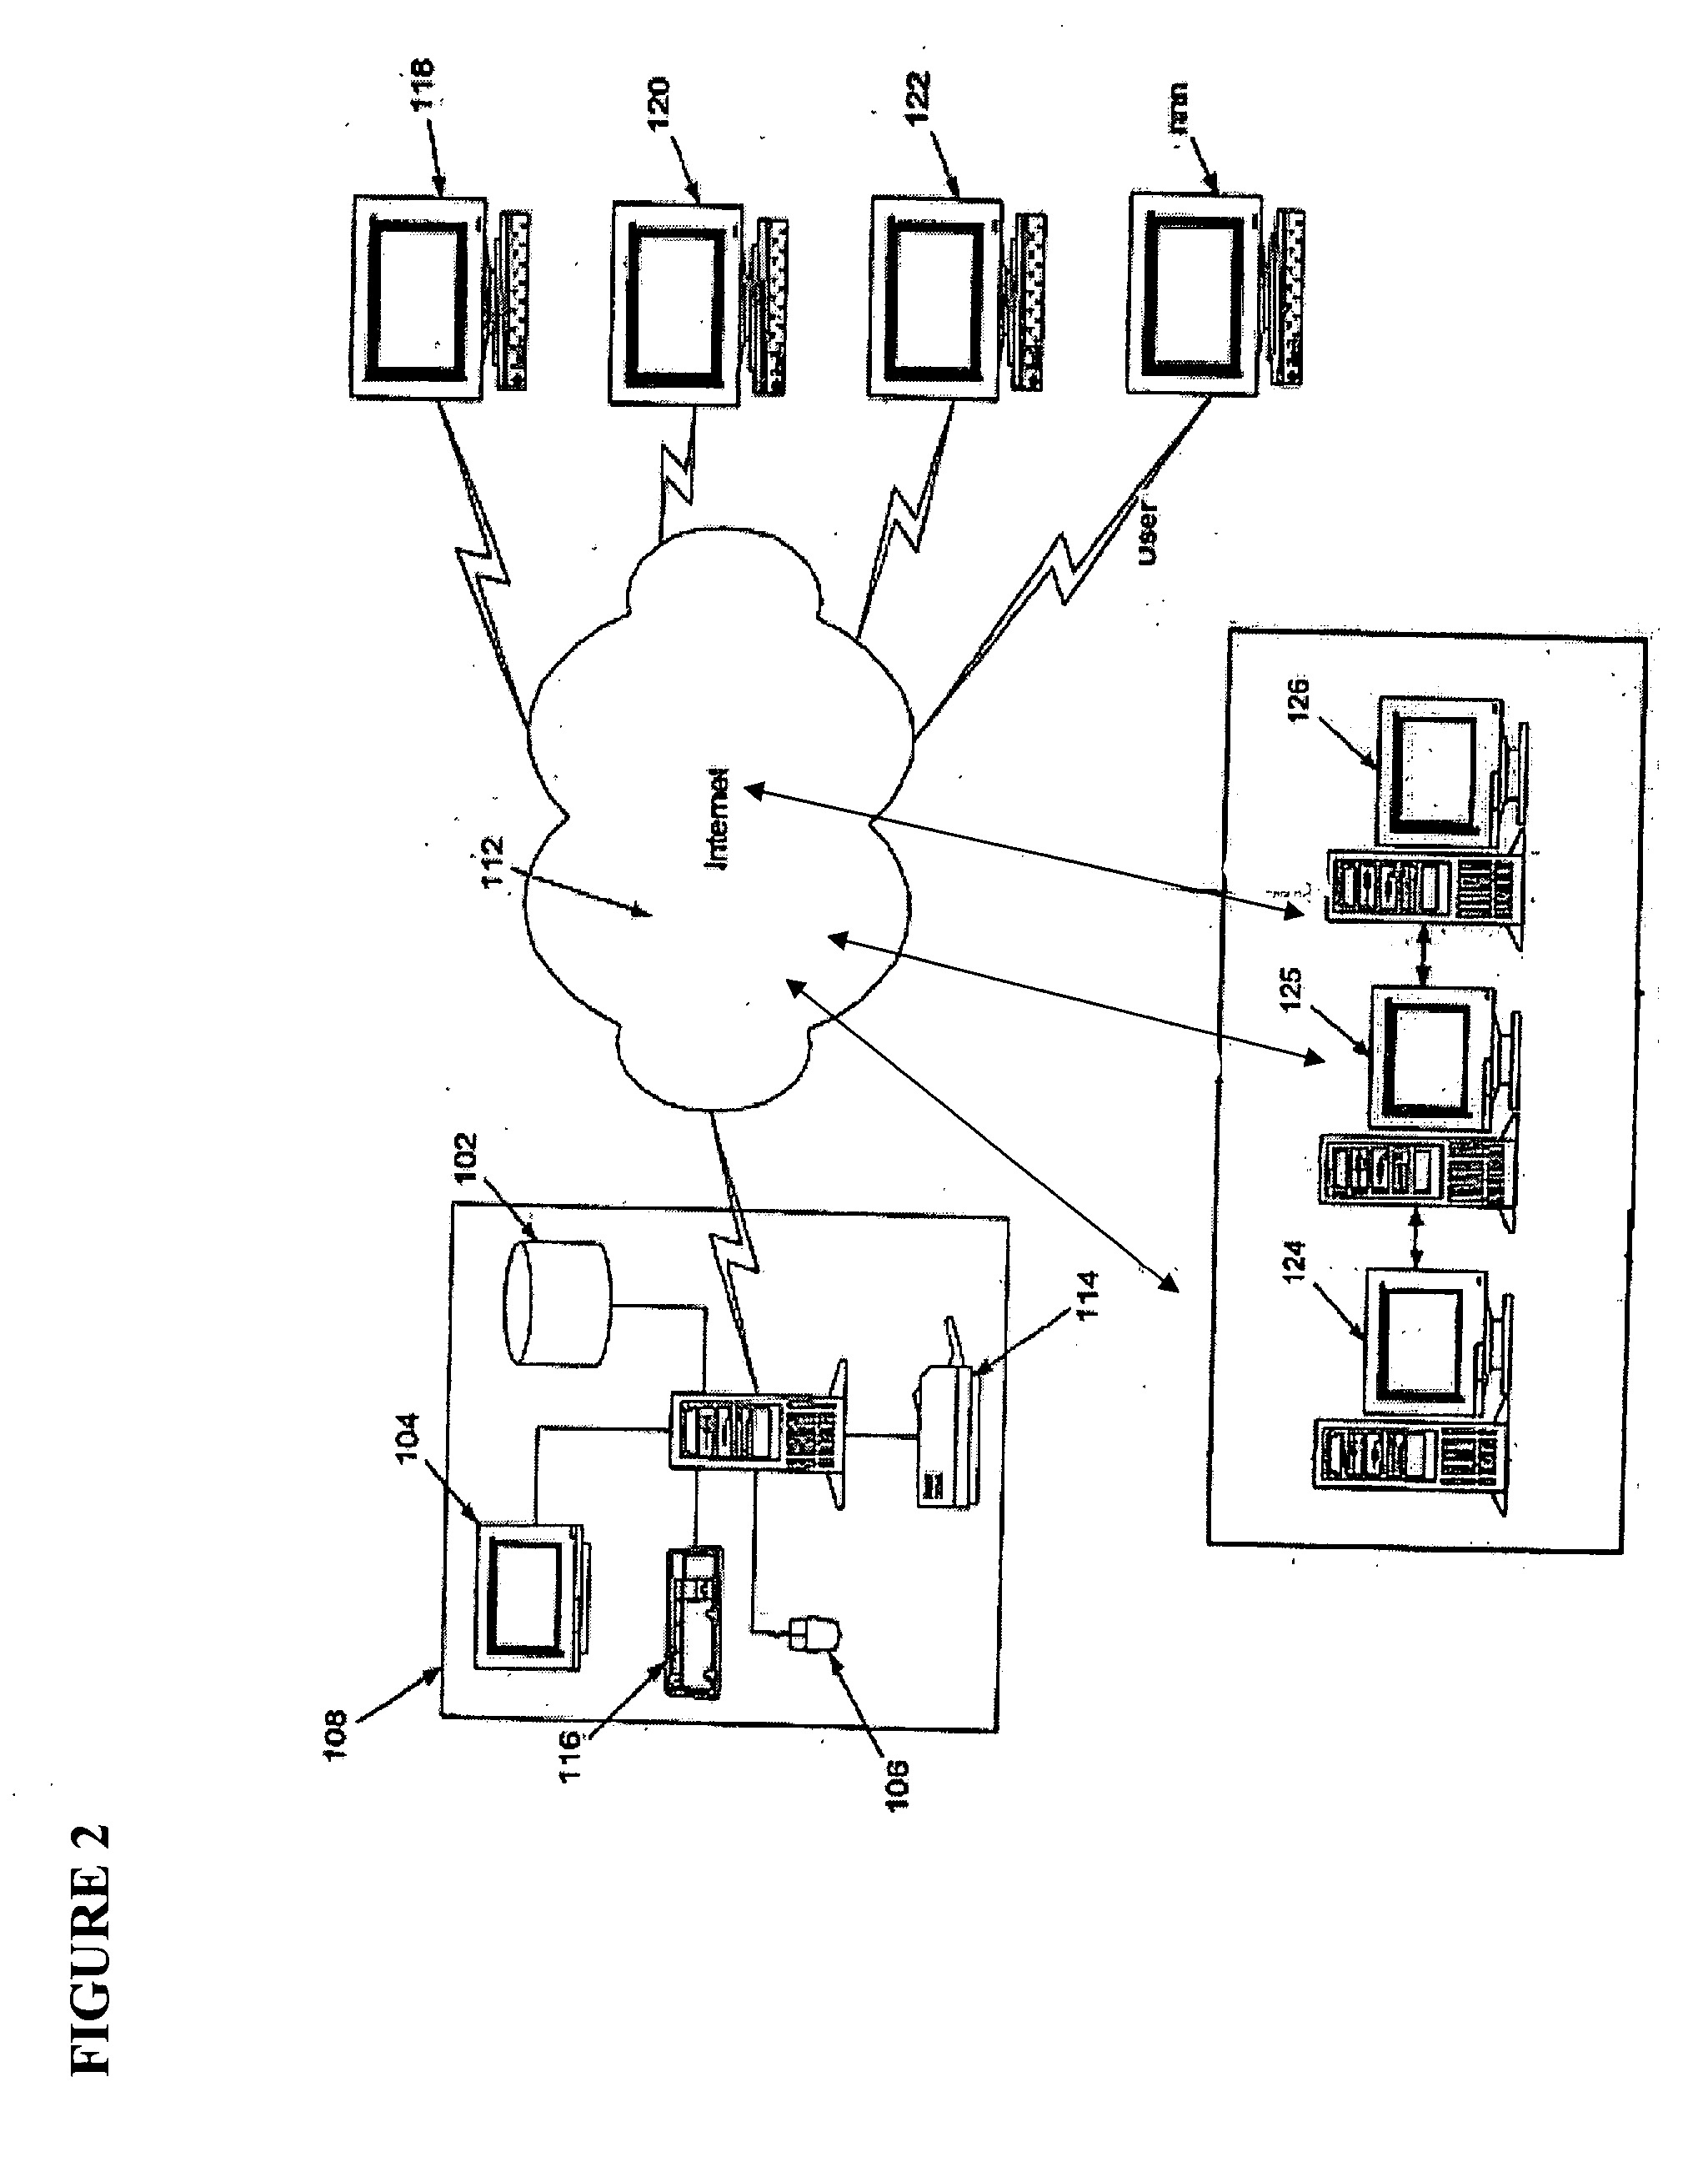 System and method for creation, distribution and tracking of advertising via electronic networks